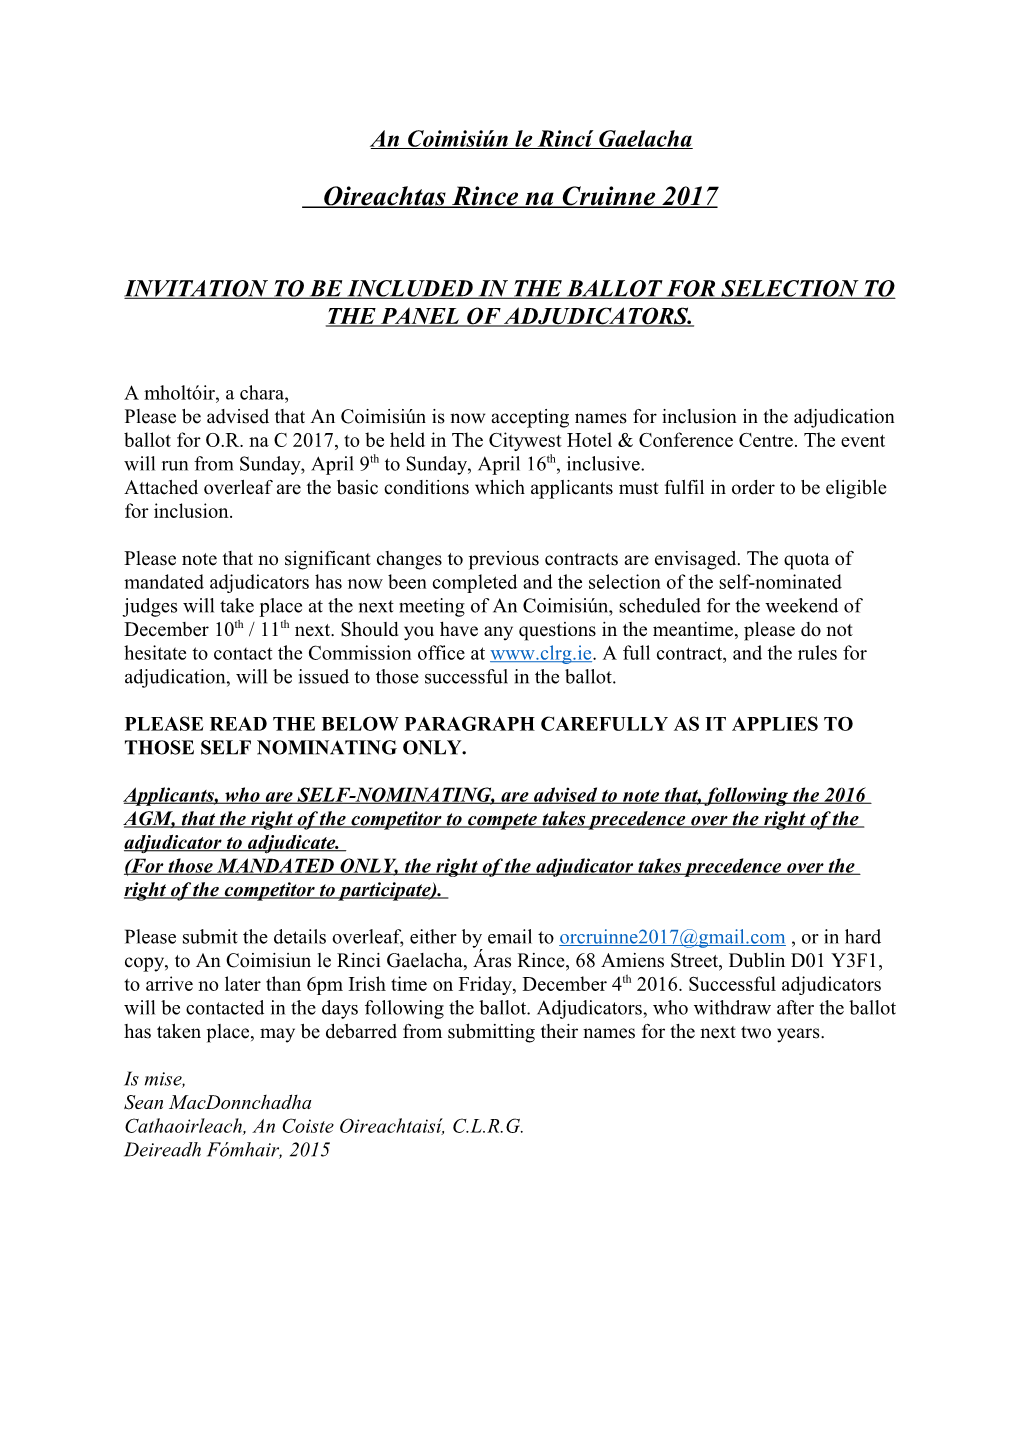 Invitation to Be Included in the Ballot for Selection to the Panel of Adjudicators